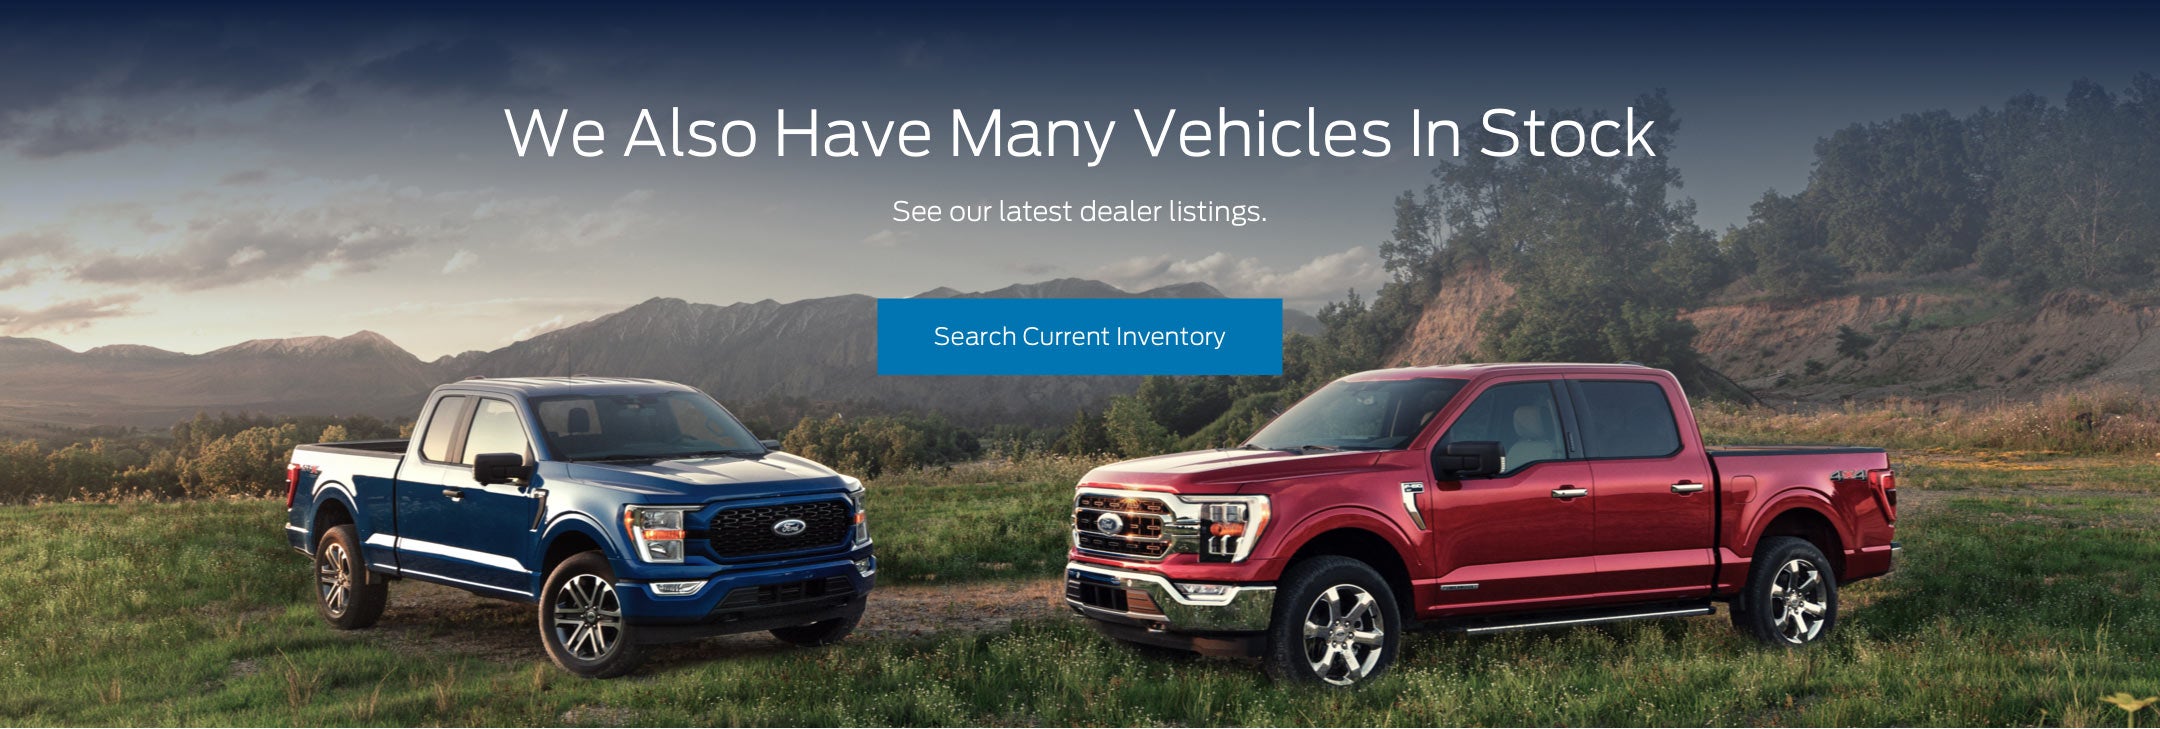 Ford vehicles in stock | Johnson City Ford in Johnson City TN